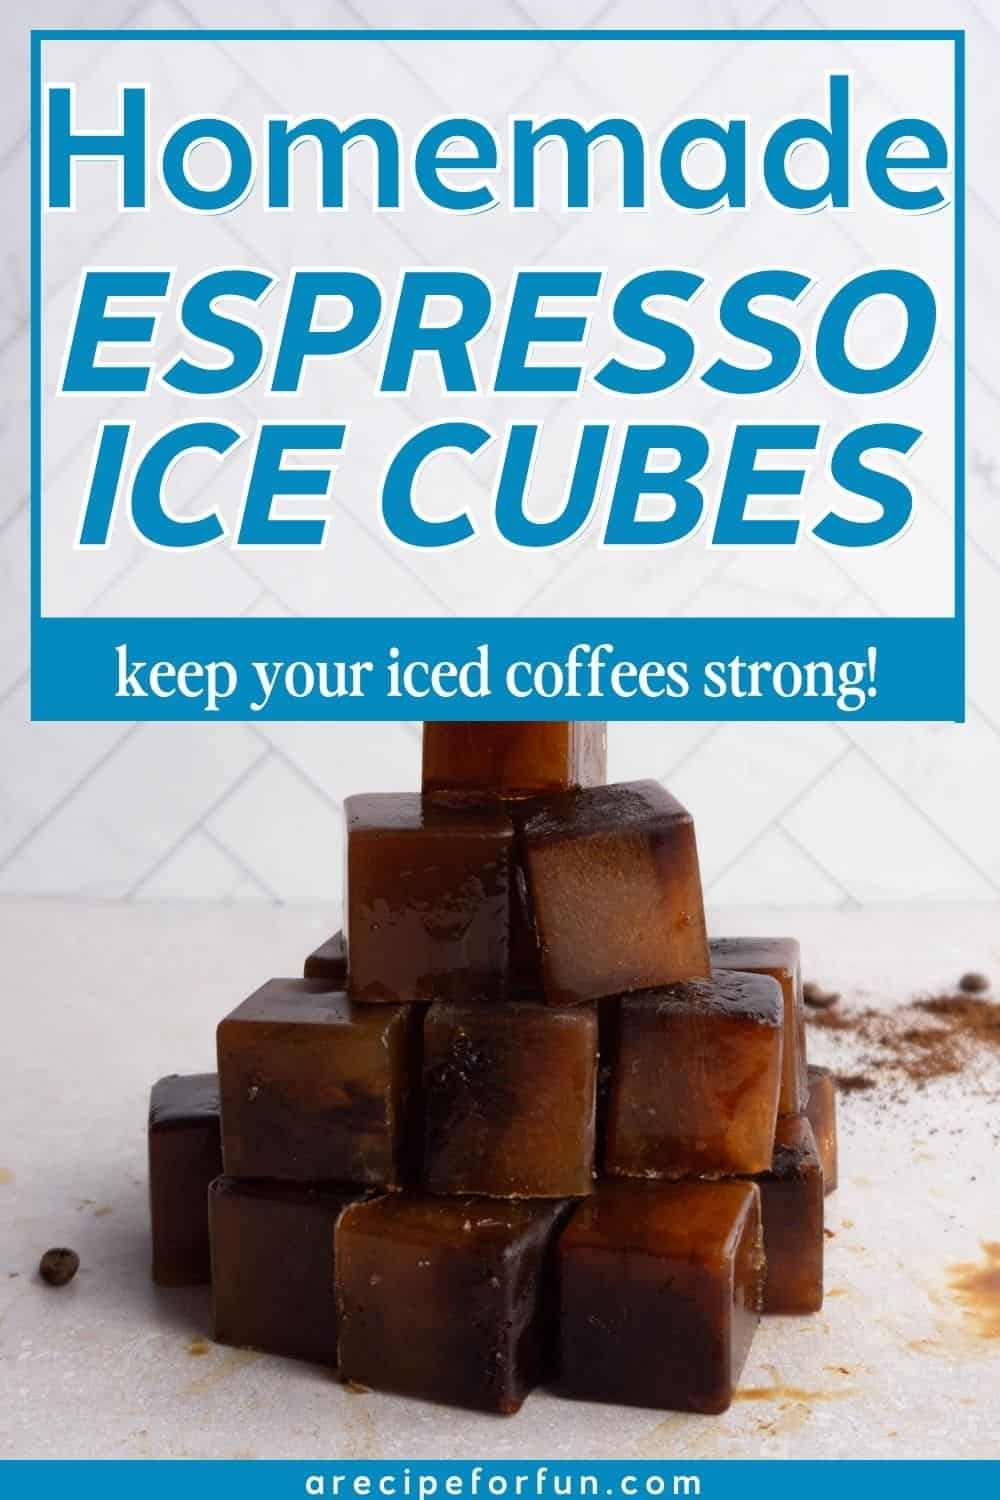 Pinterest Pin for espresso ice cubes.